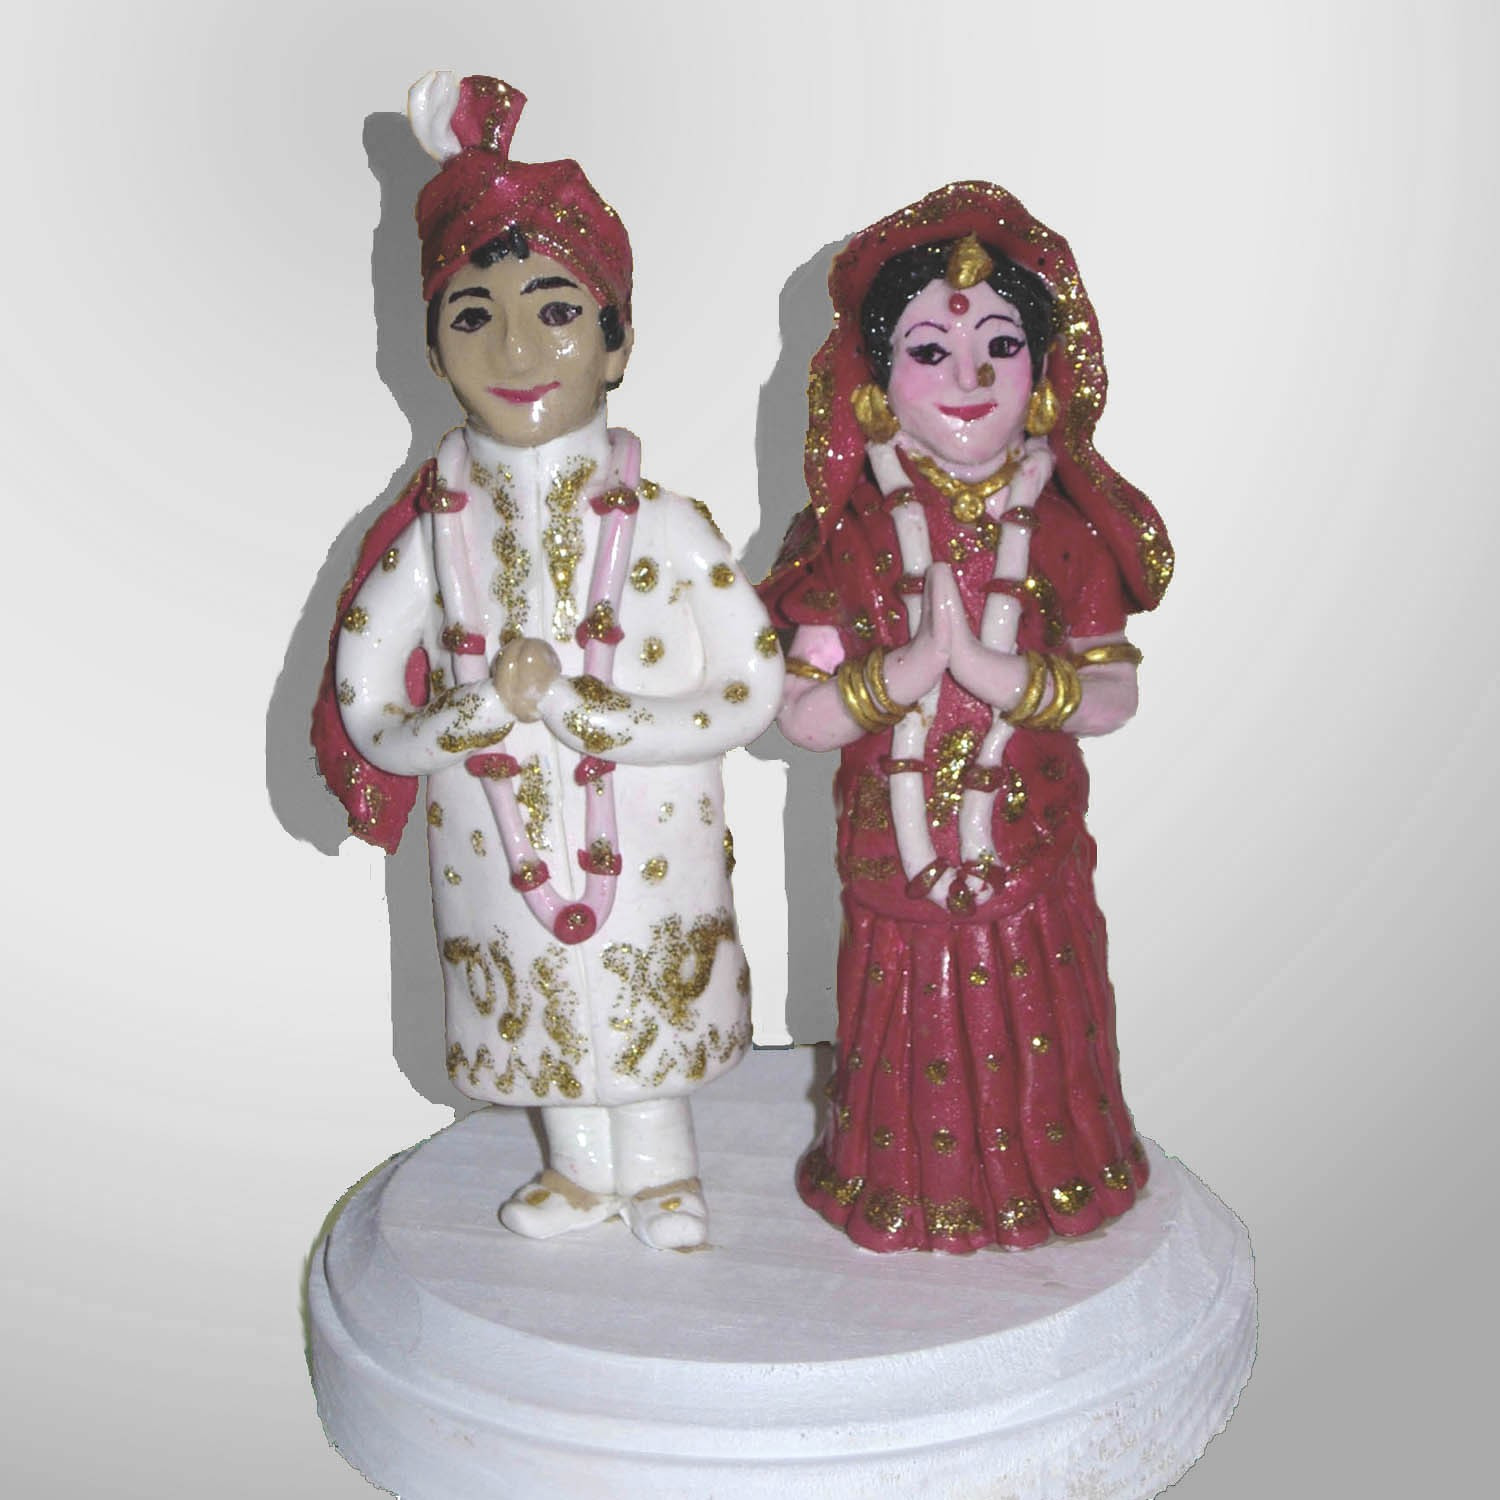 Indian Wedding Cake Toppers
 Indian wedding cake topper idea in 2017